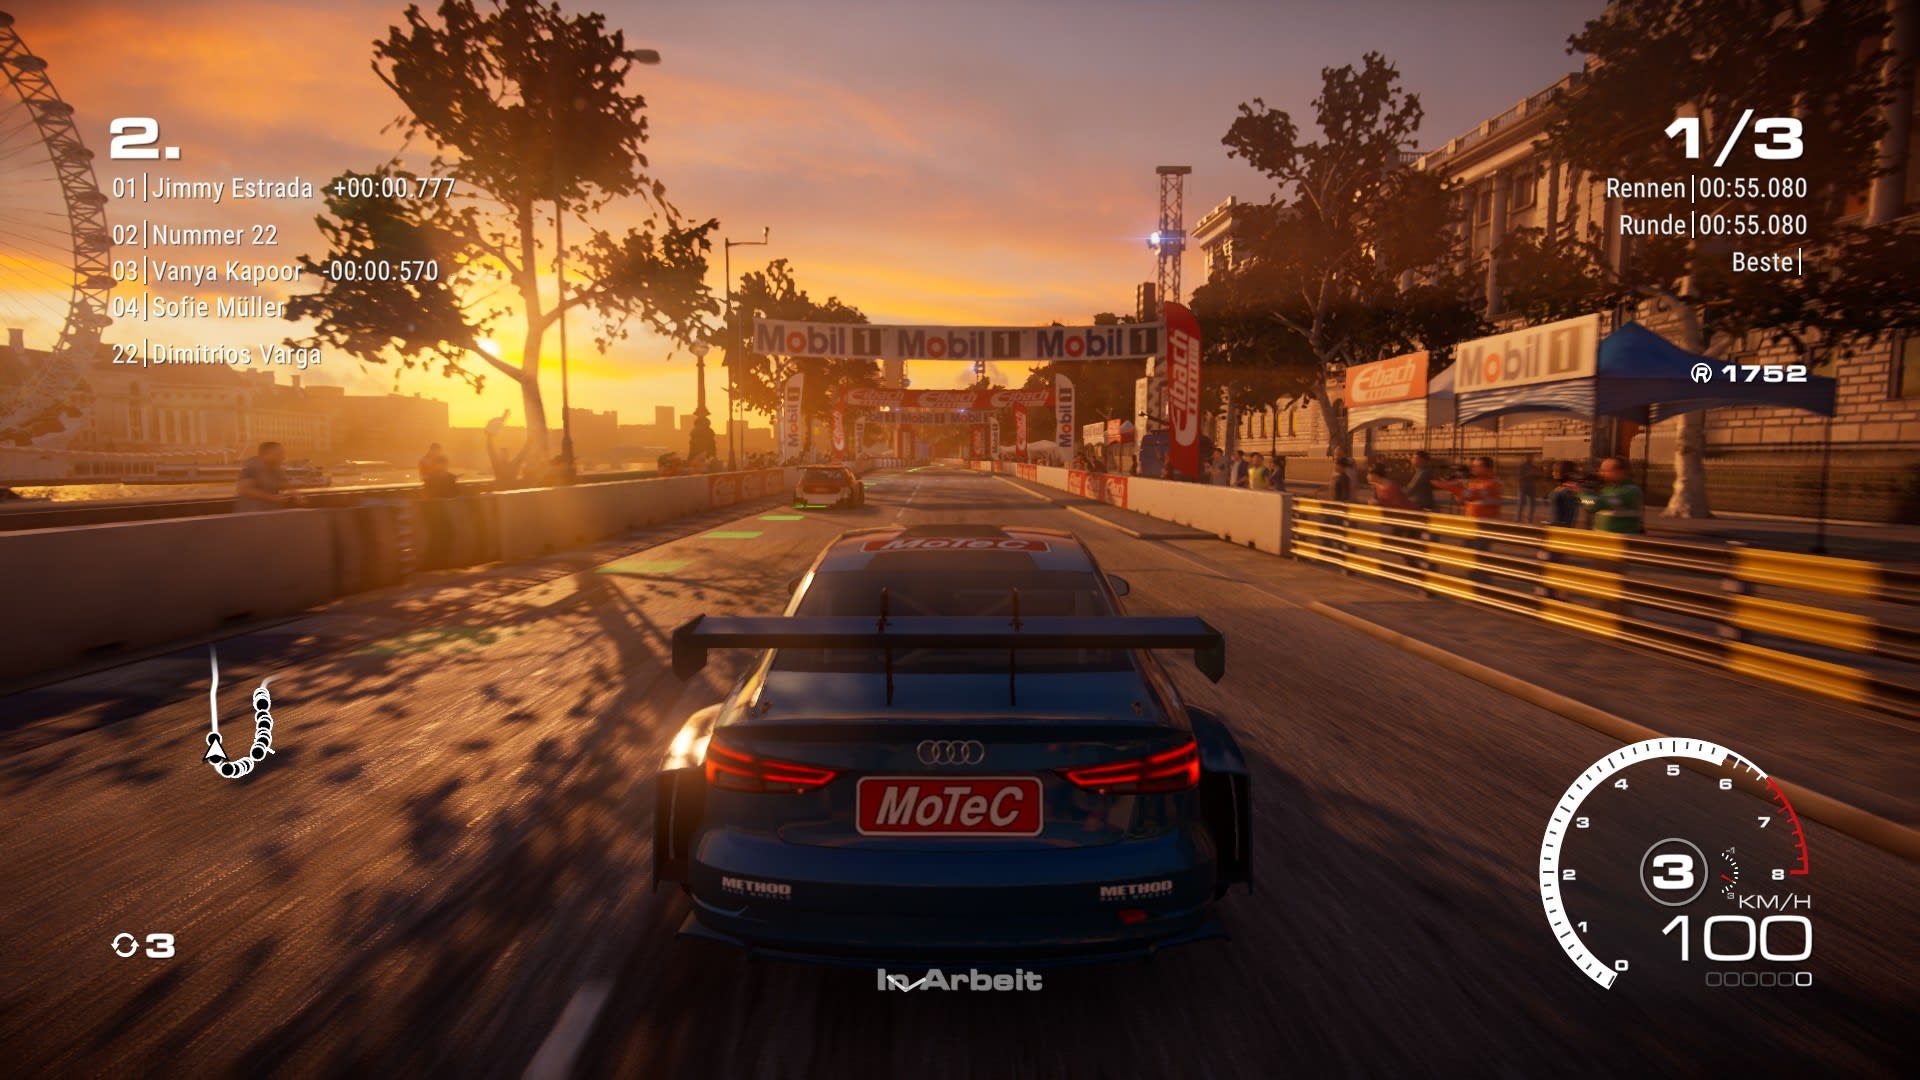 10 racing video games to look forward to in 2021 and 2022